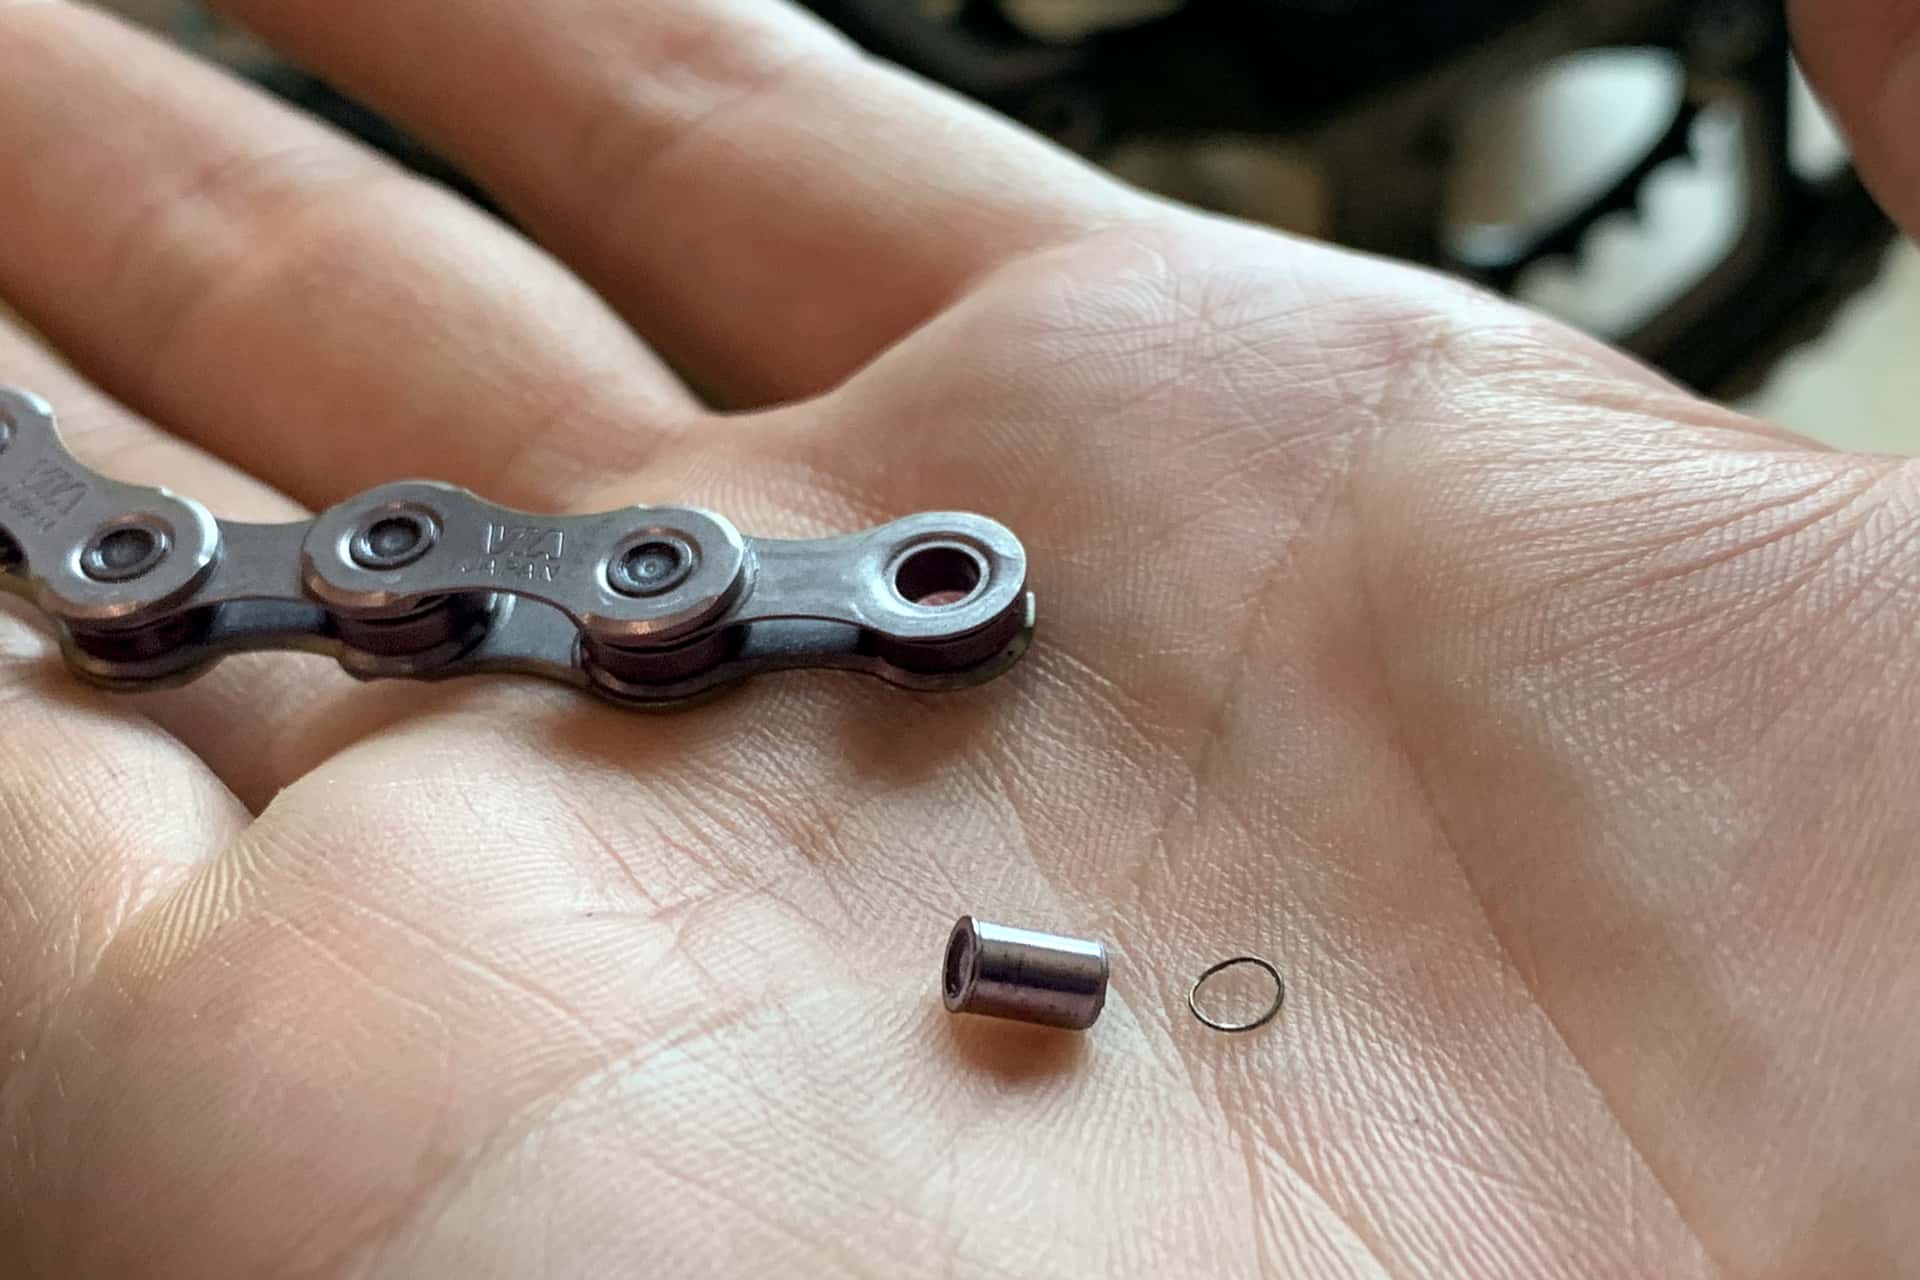 bicycle chain broken by shearing the rim off a pin